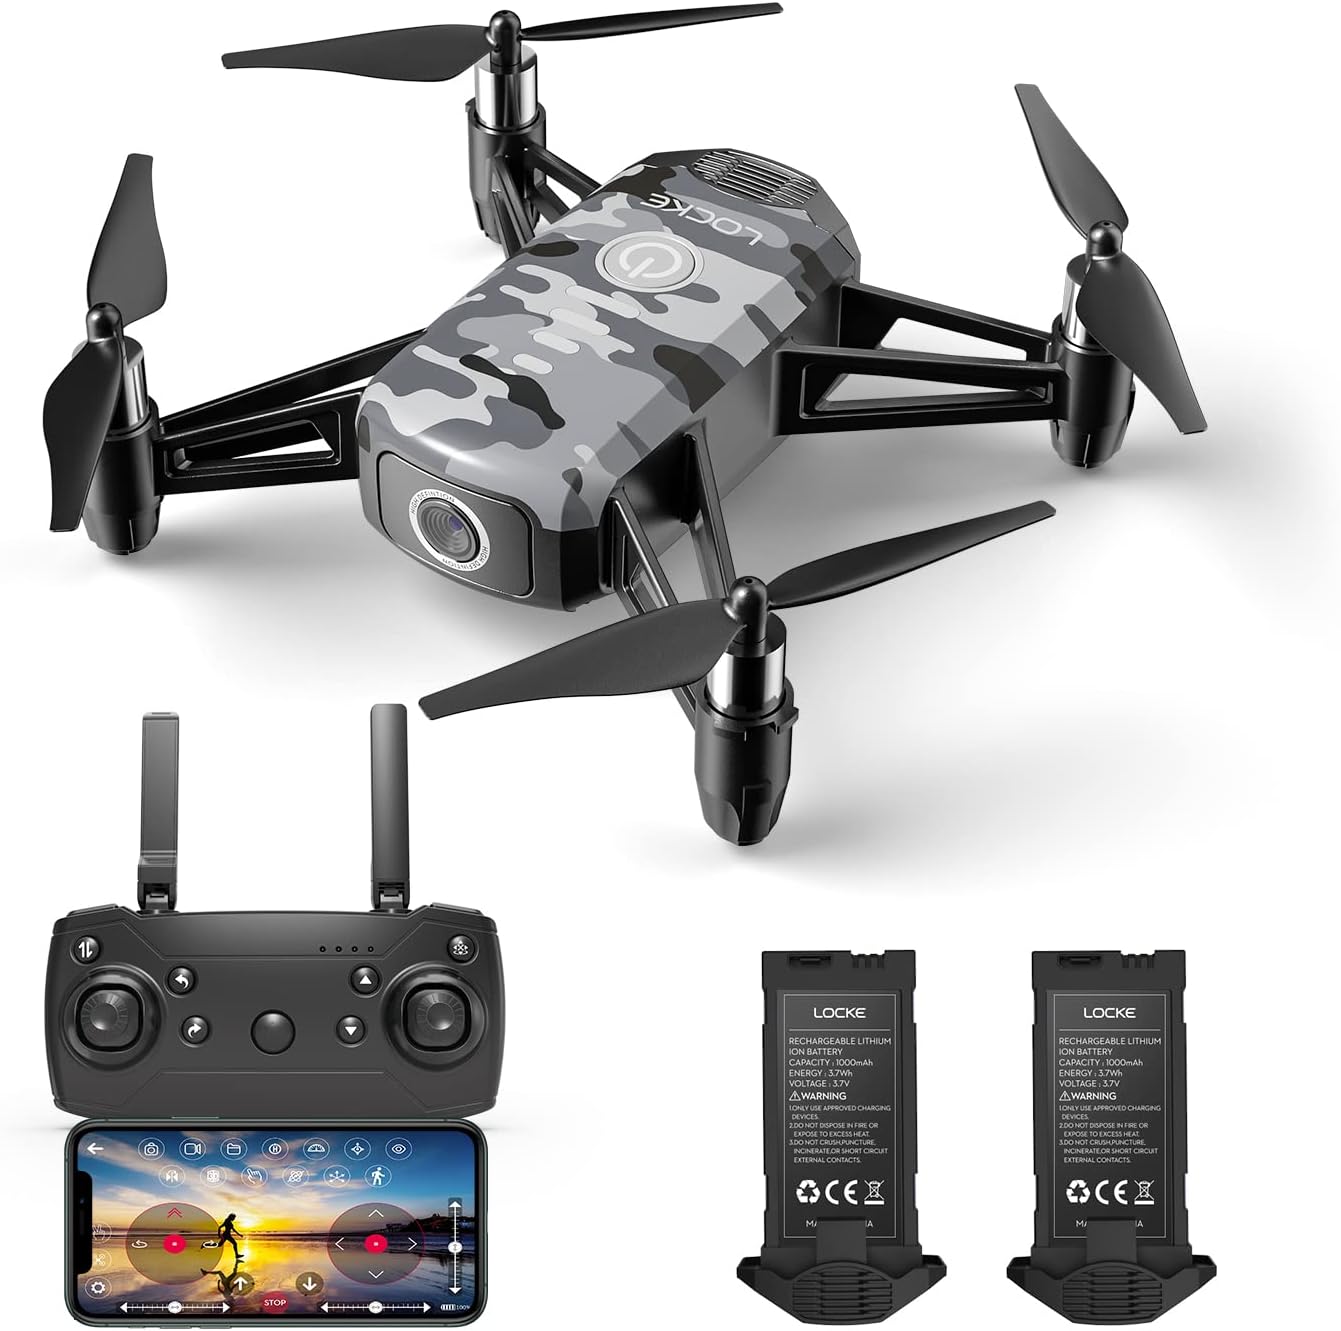 52814 - HR Drone For Kids With 1080p HD FPV Camera USA